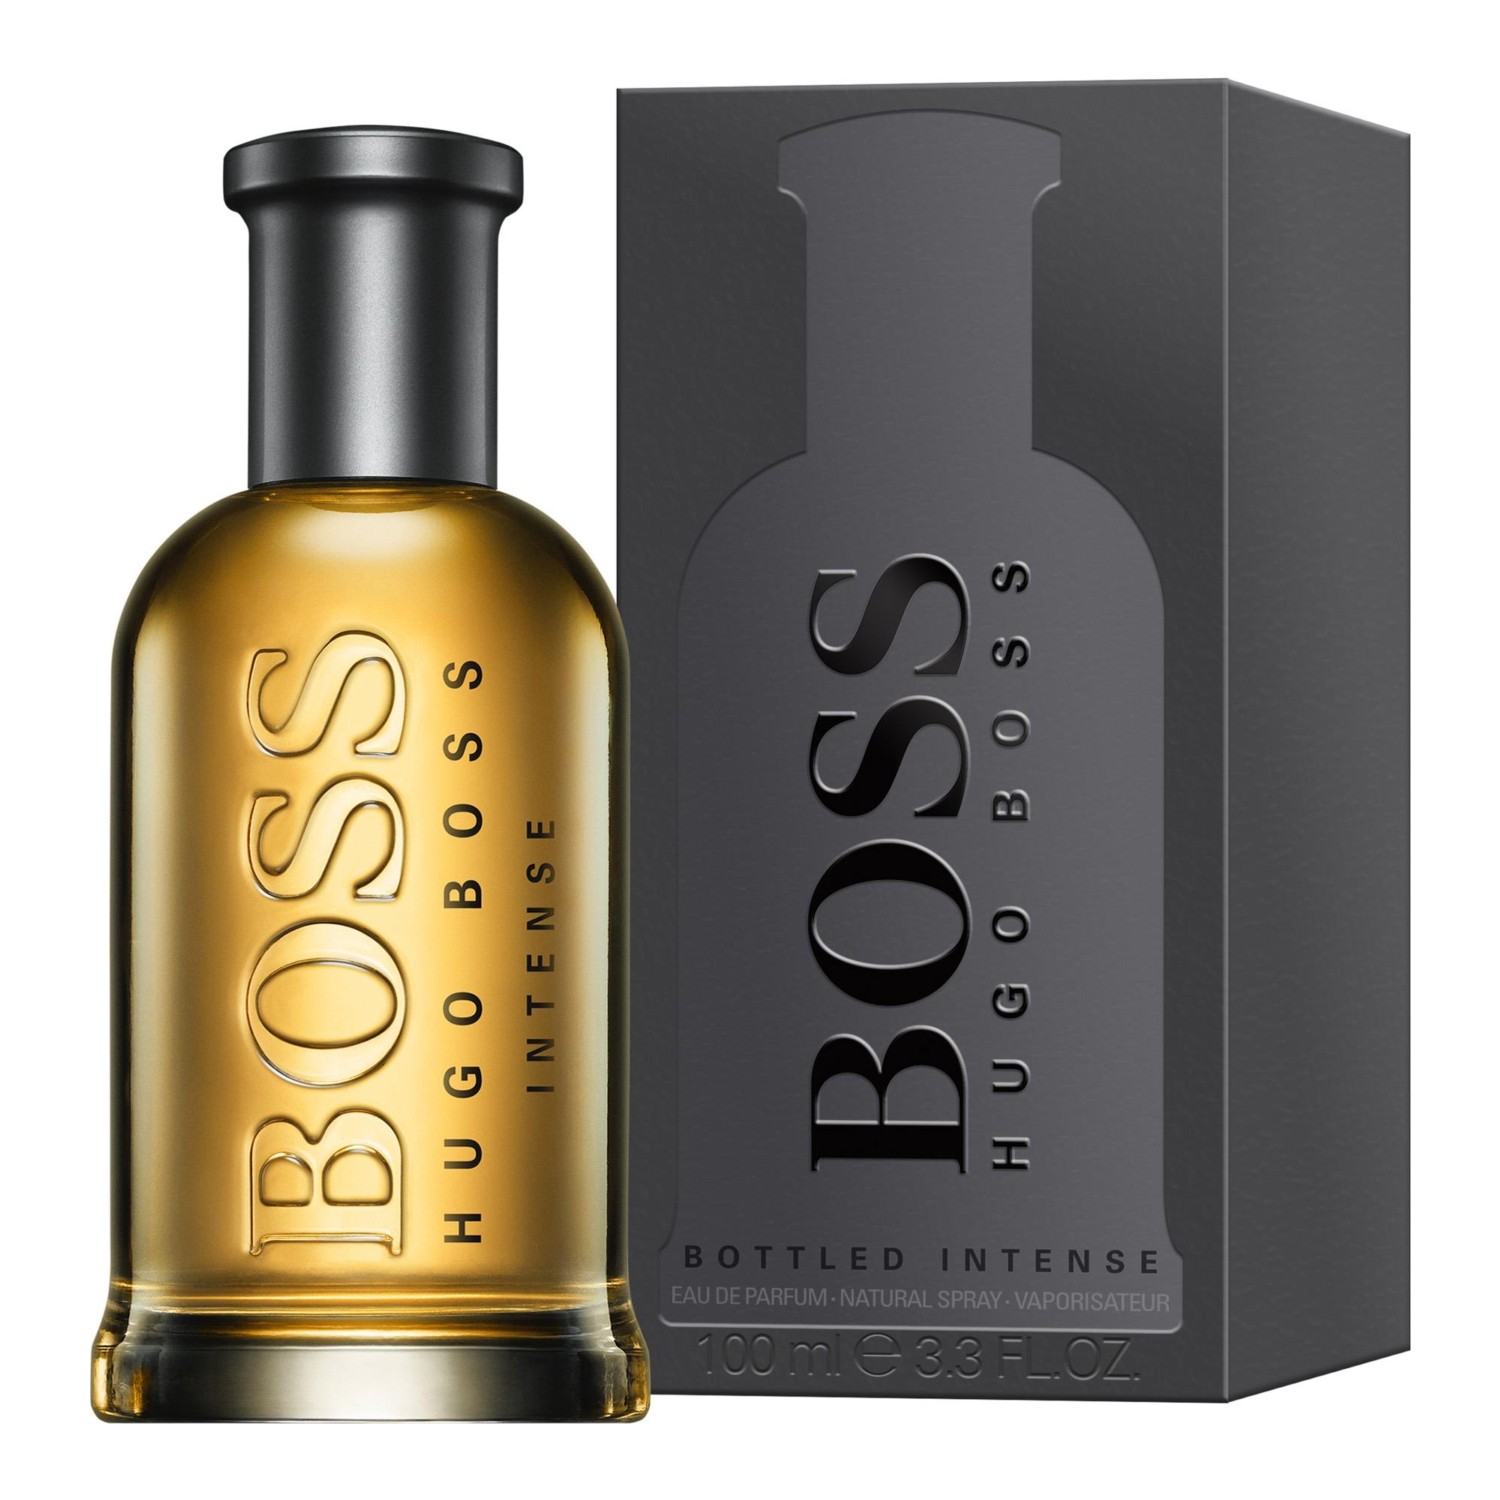 hugo boss intense parfum 100ml Cheaper Than Retail Price\u003e Buy Clothing,  Accessories and lifestyle products for women \u0026 men -